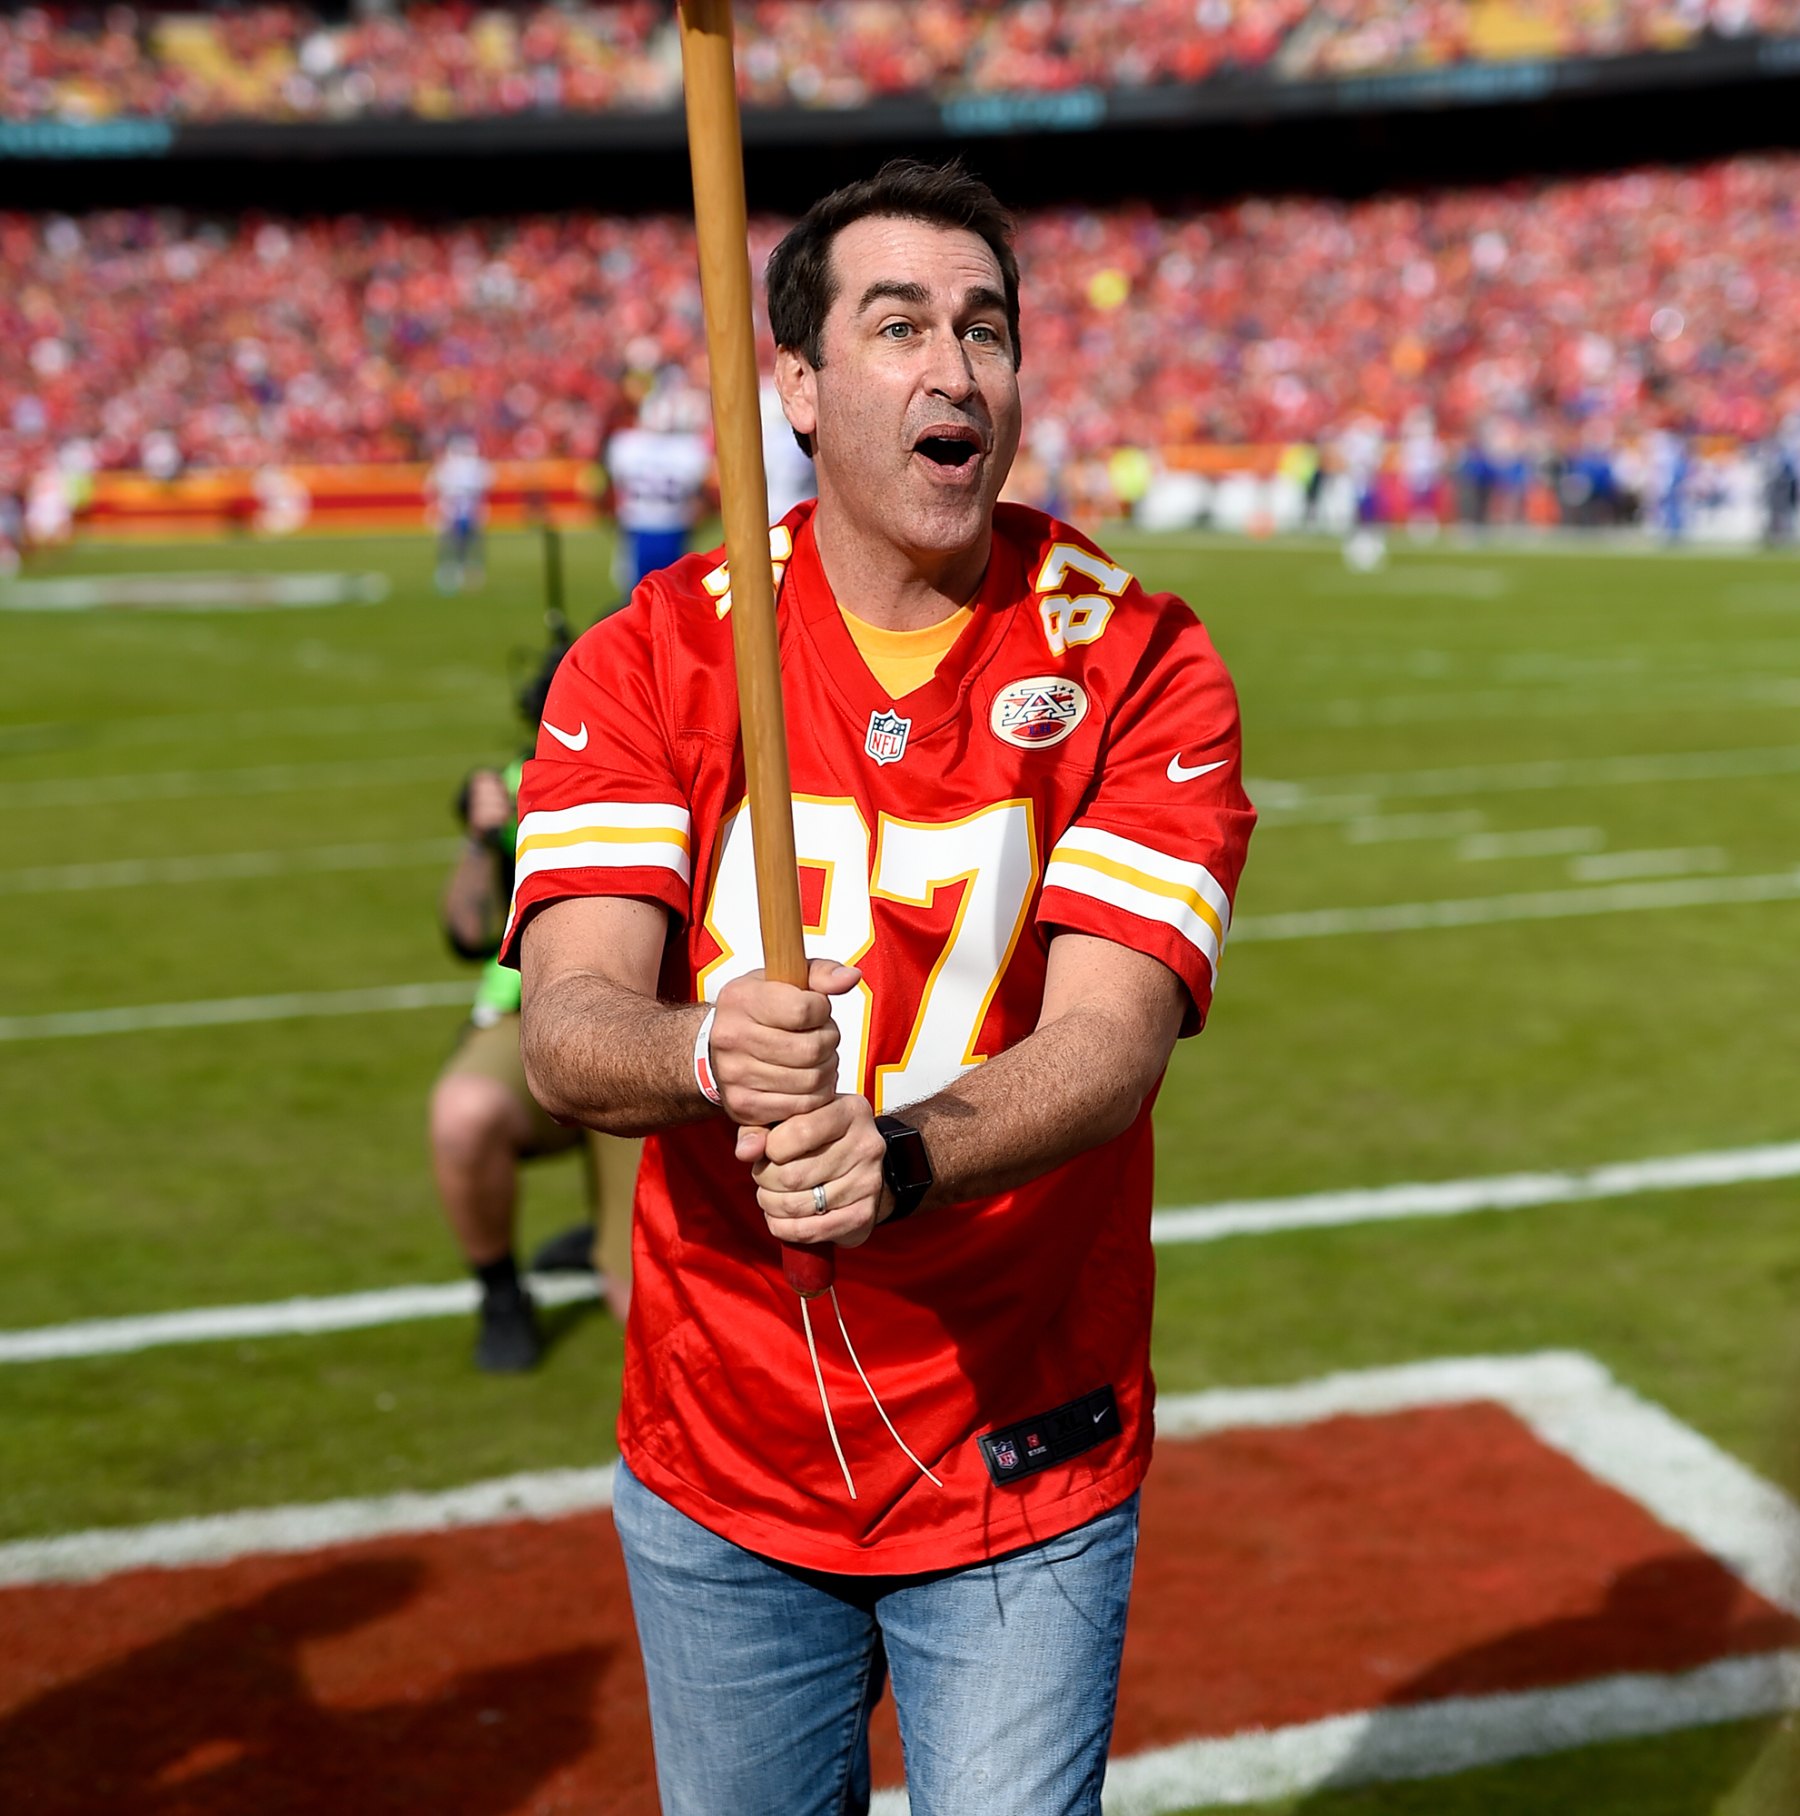 Our favorite Chiefs fanboy is channeling his inner Kelce and ready to knock it out of the park, on and off the field!